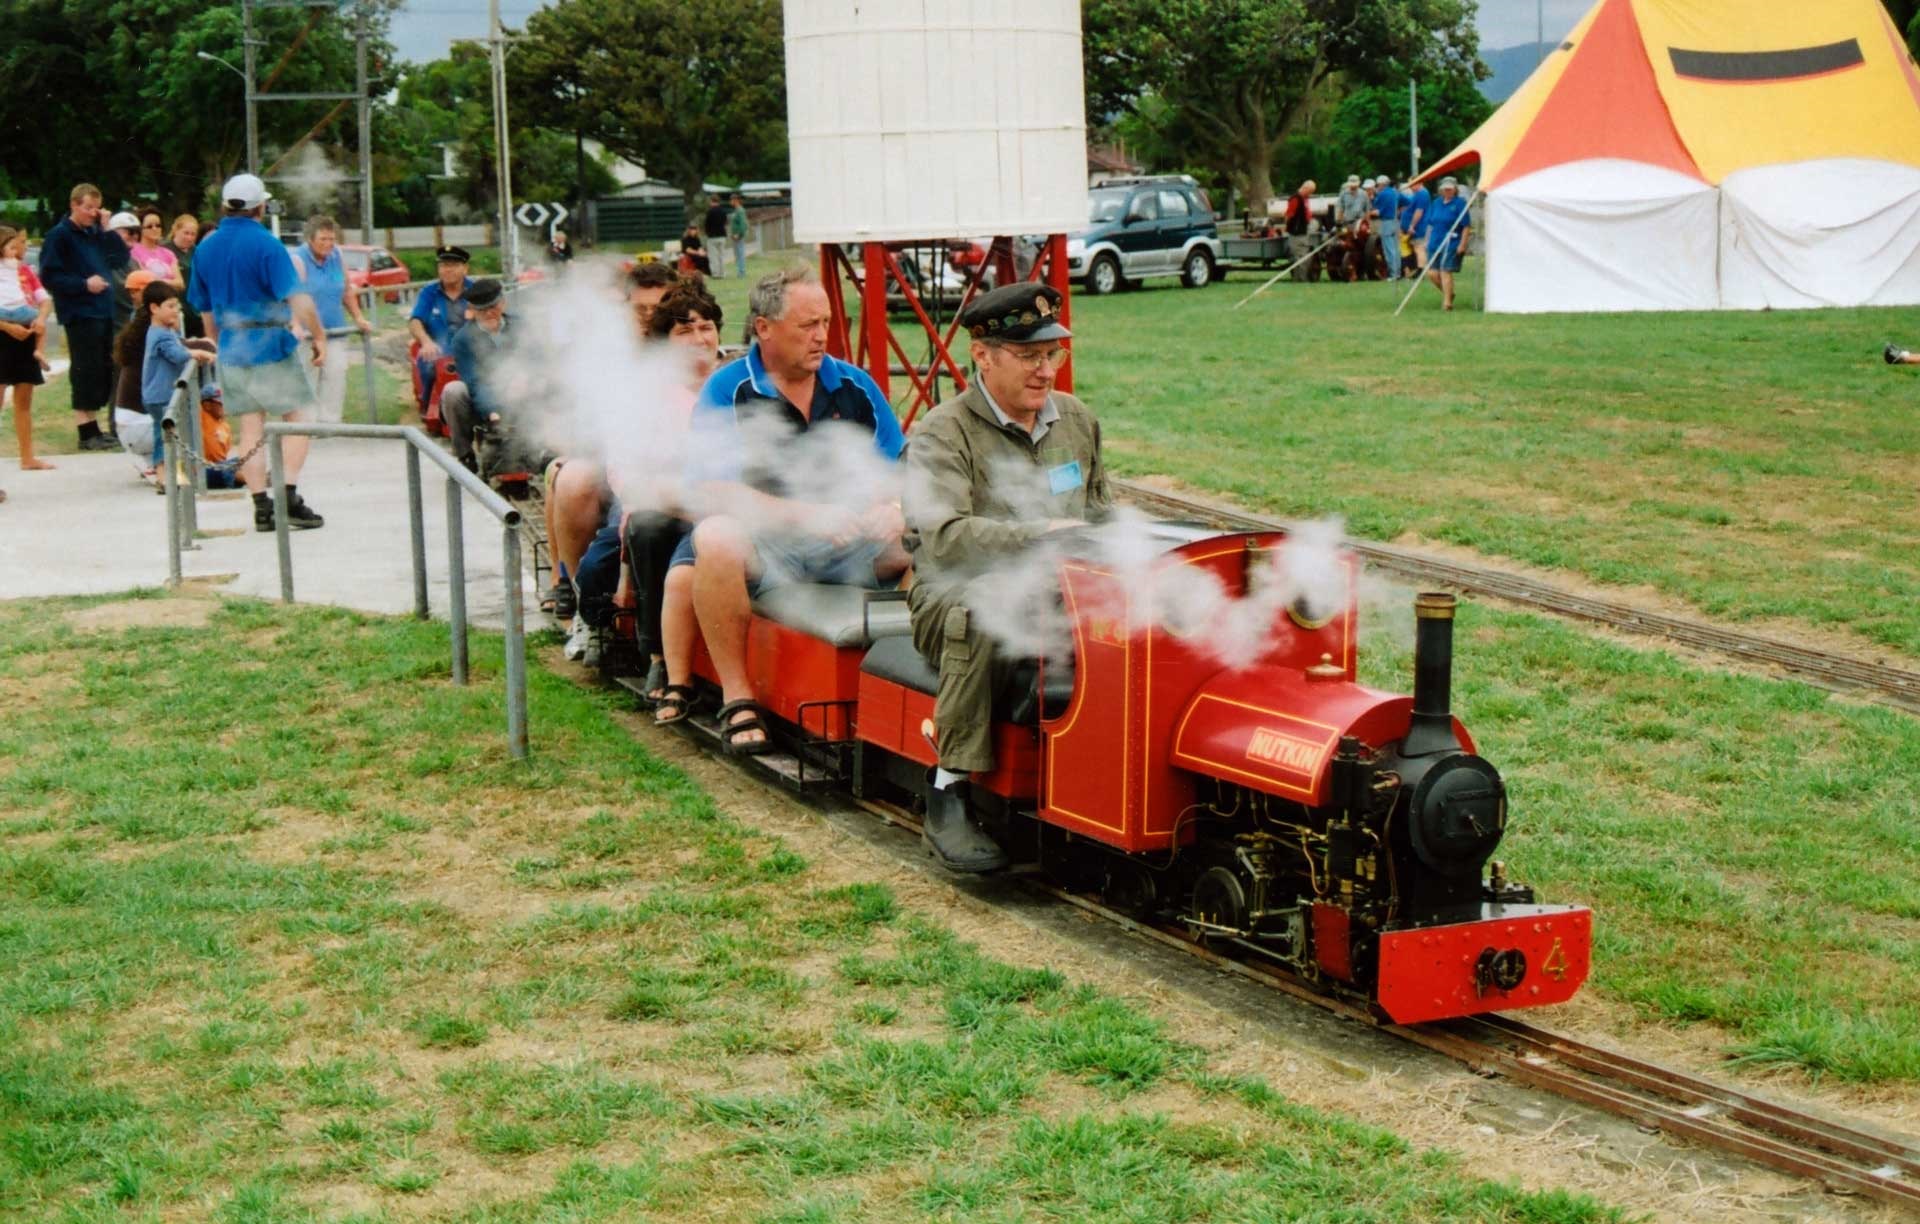 Image shows a miniature red steam train carrying people on the track.